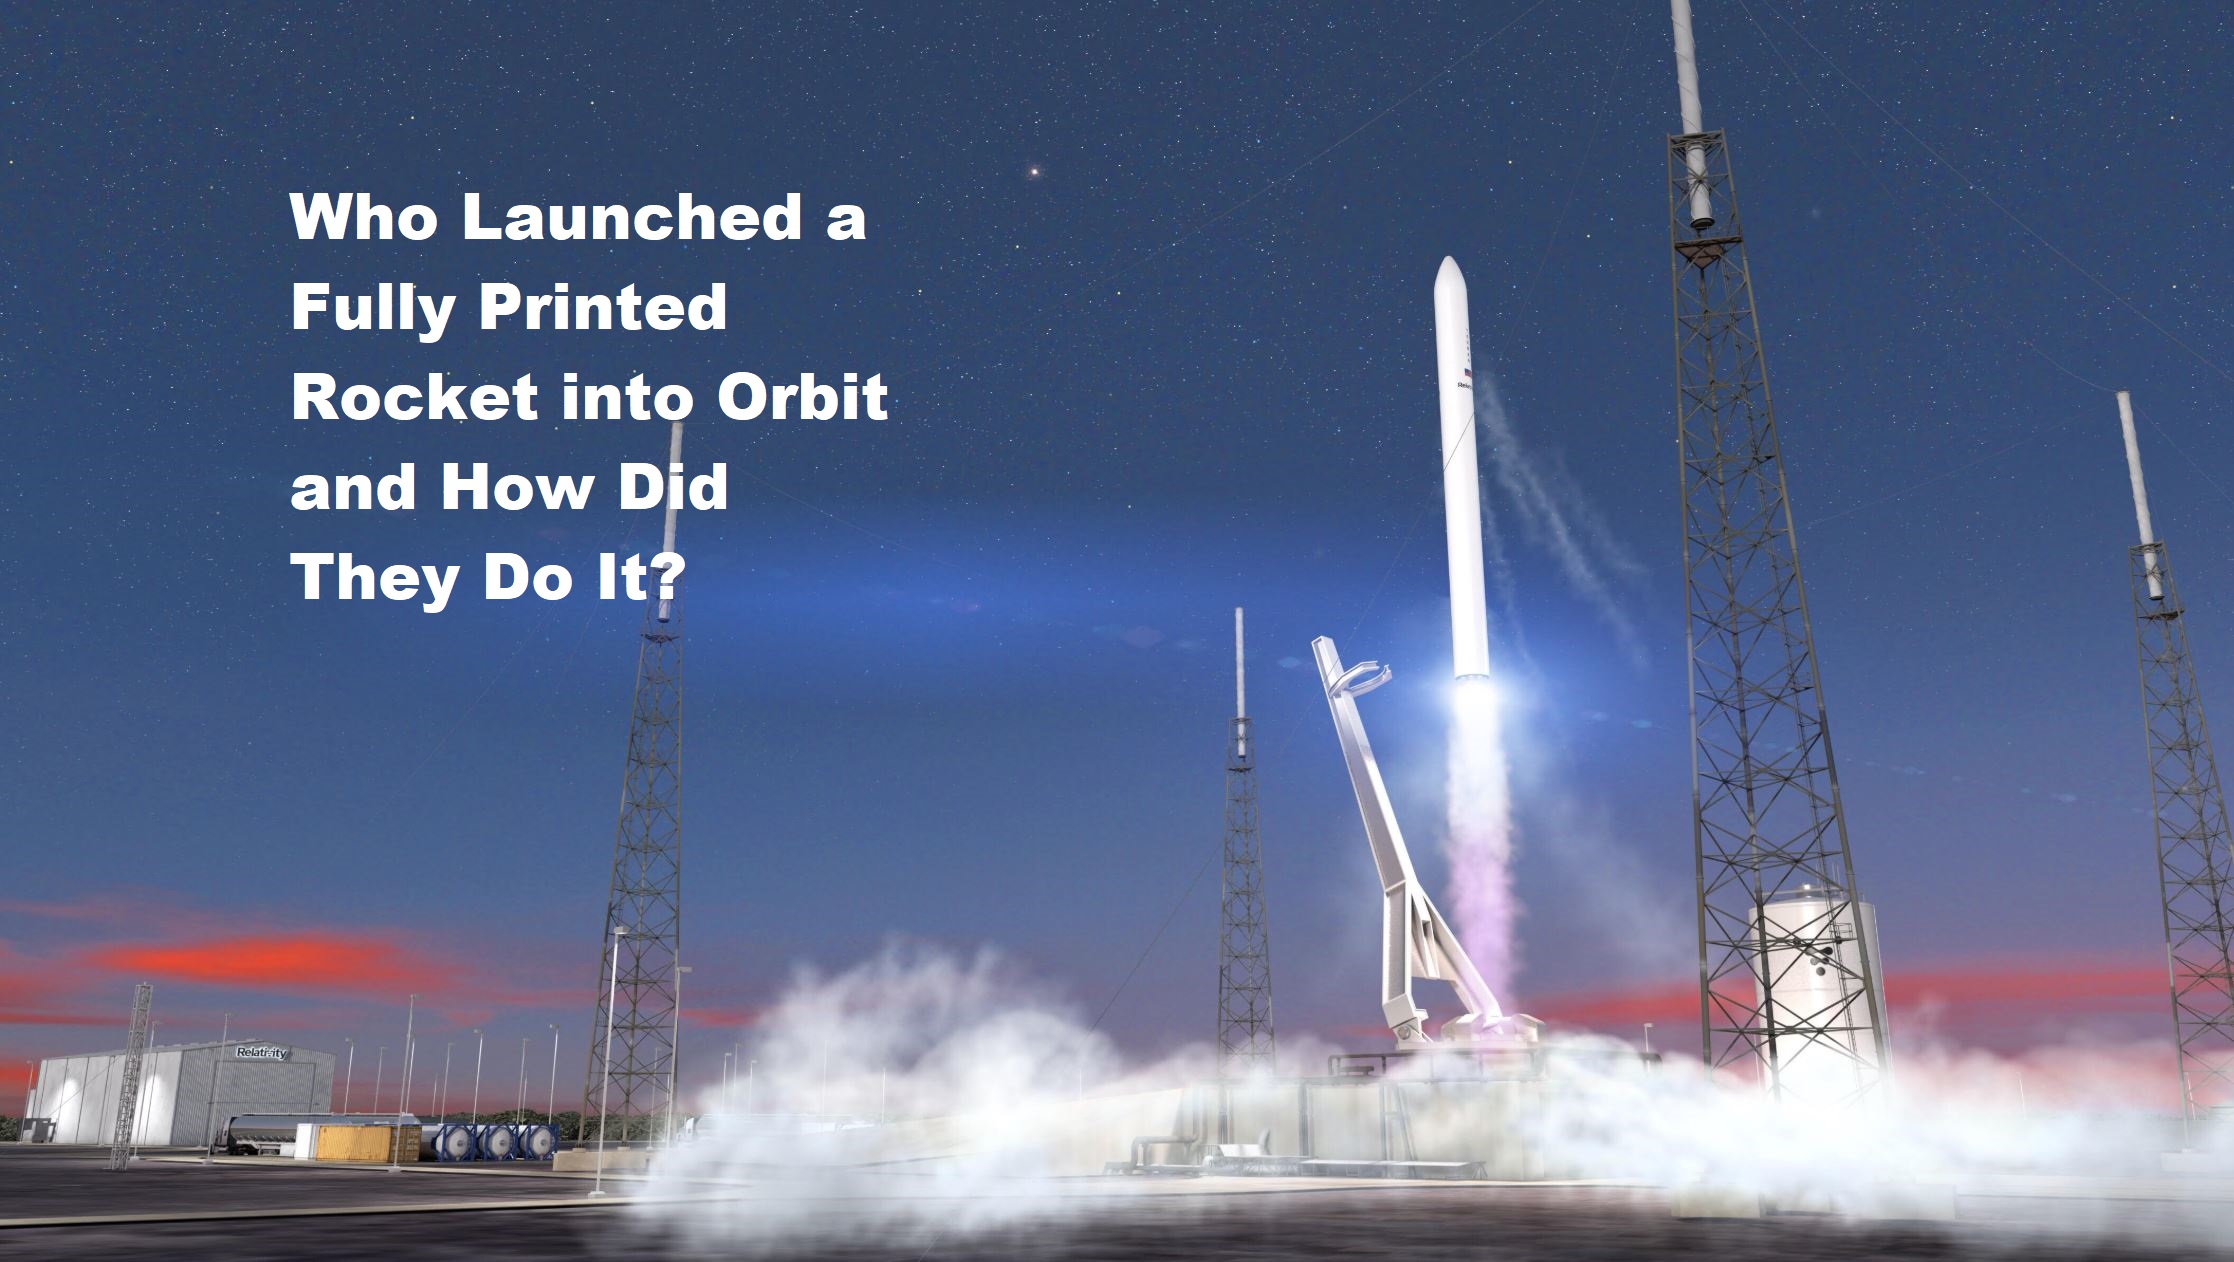 Who Launched a Fully Printed Rocket into Orbit and How Did They Do It?